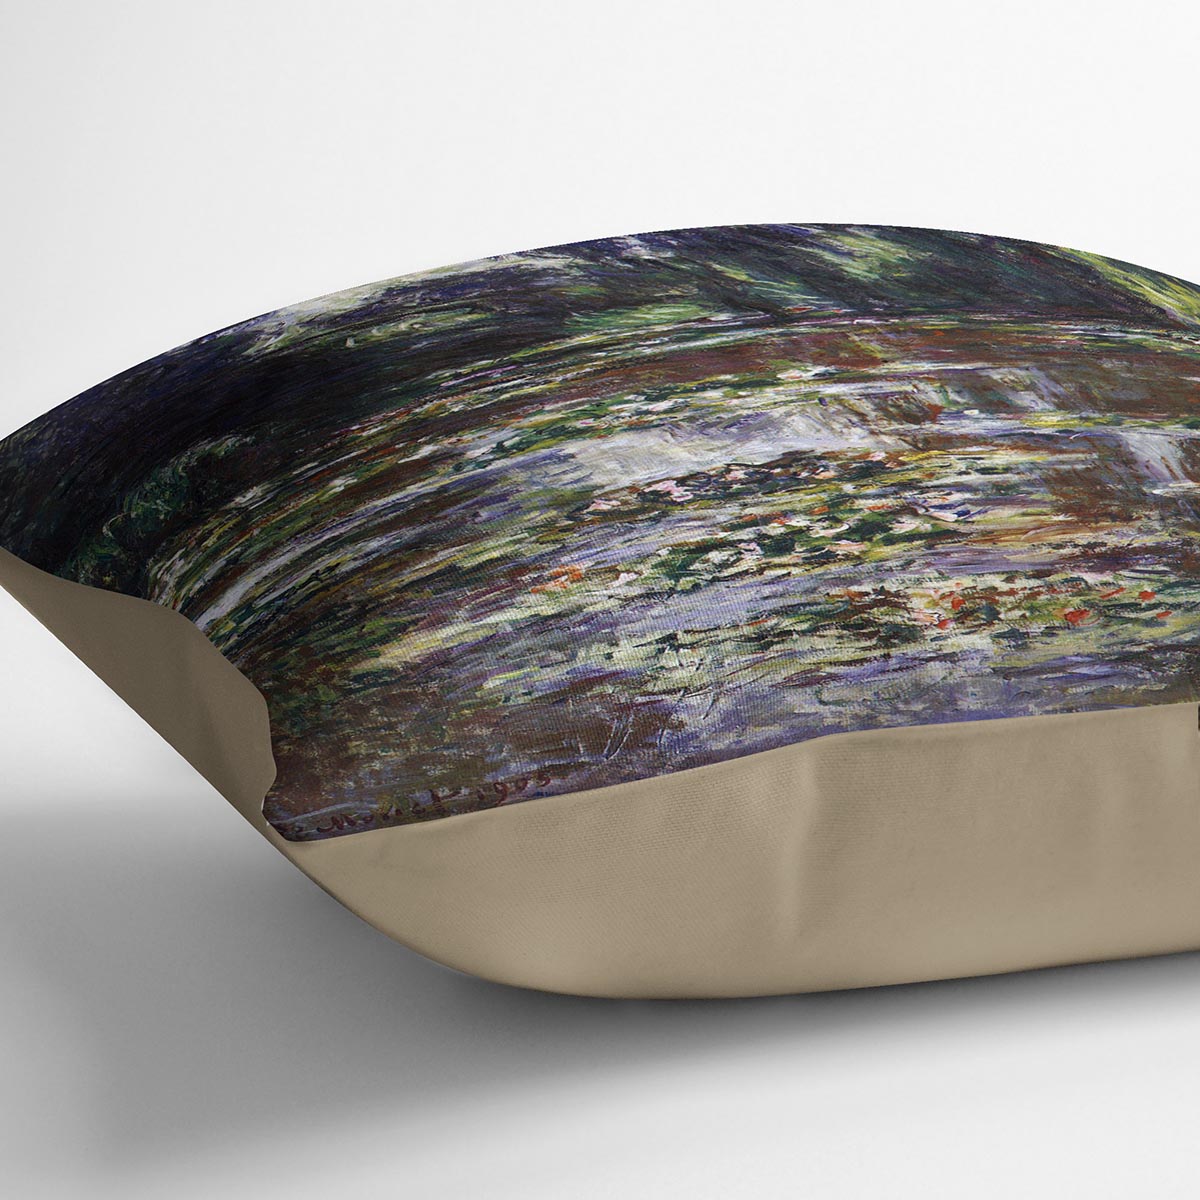 Water lilies water landscape 3 by Monet Cushion